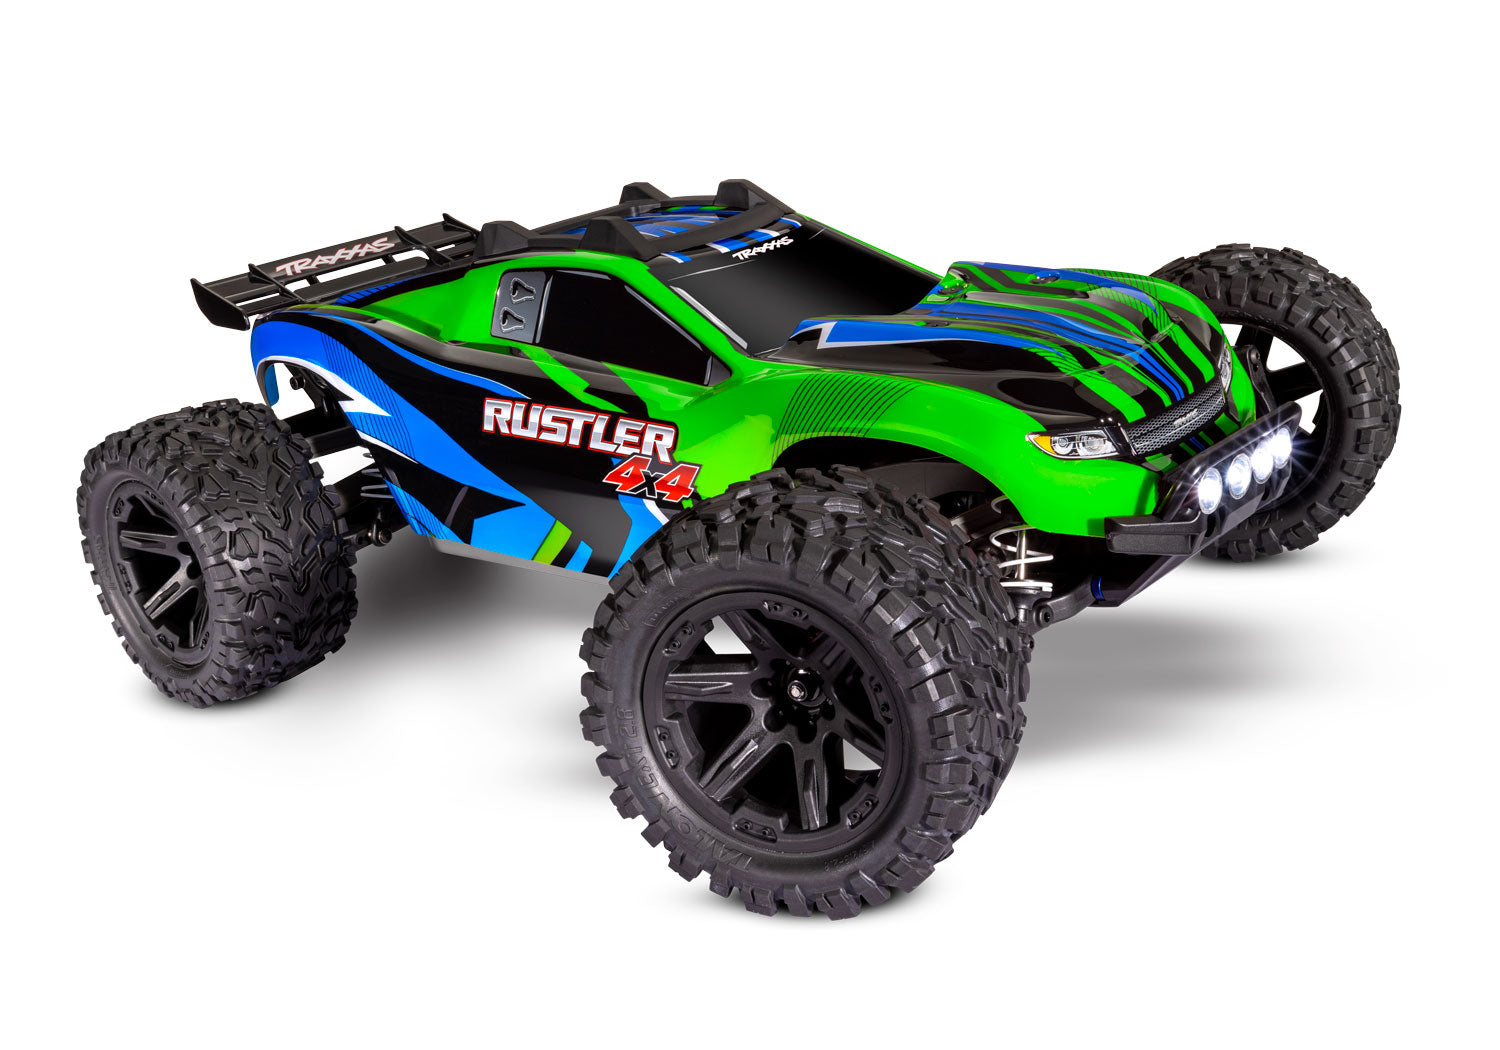 TRAXXAS 67064-61 Rustler 4X4® 1/10 scale waterproof 4WD stadium truck. RTR, with TQ™ 2.4GHz radio system, XL-5® Electronic Speed Control, 8.4V NiMH 3000 mAh battery, 4-amp DC Charger, LED lighting, and painted body.